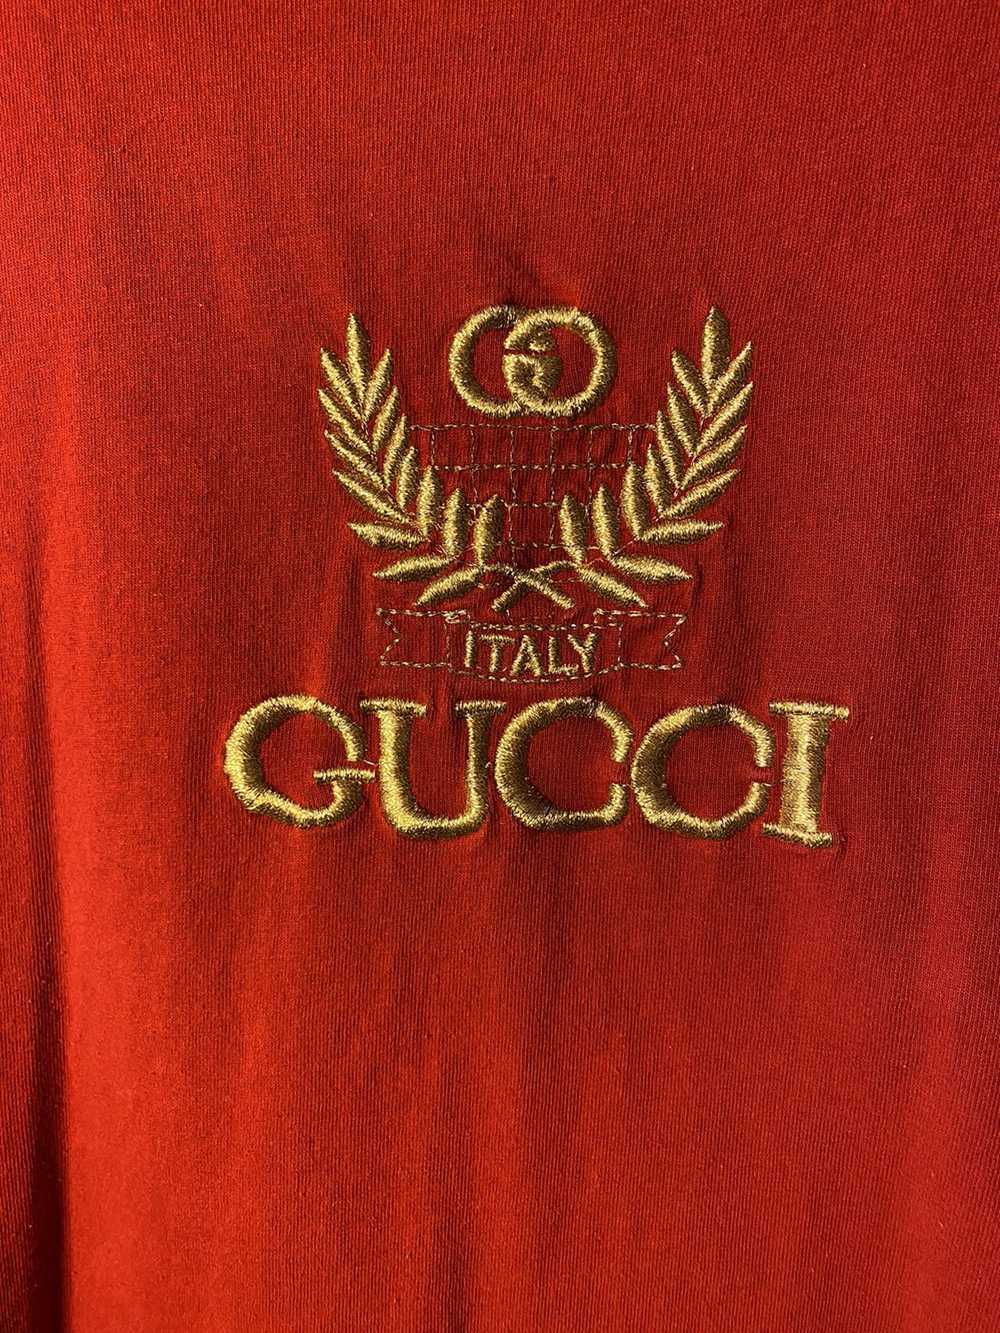 Jerzees Vintage 90s Gucci Embroidered Graphic Tee - image 3